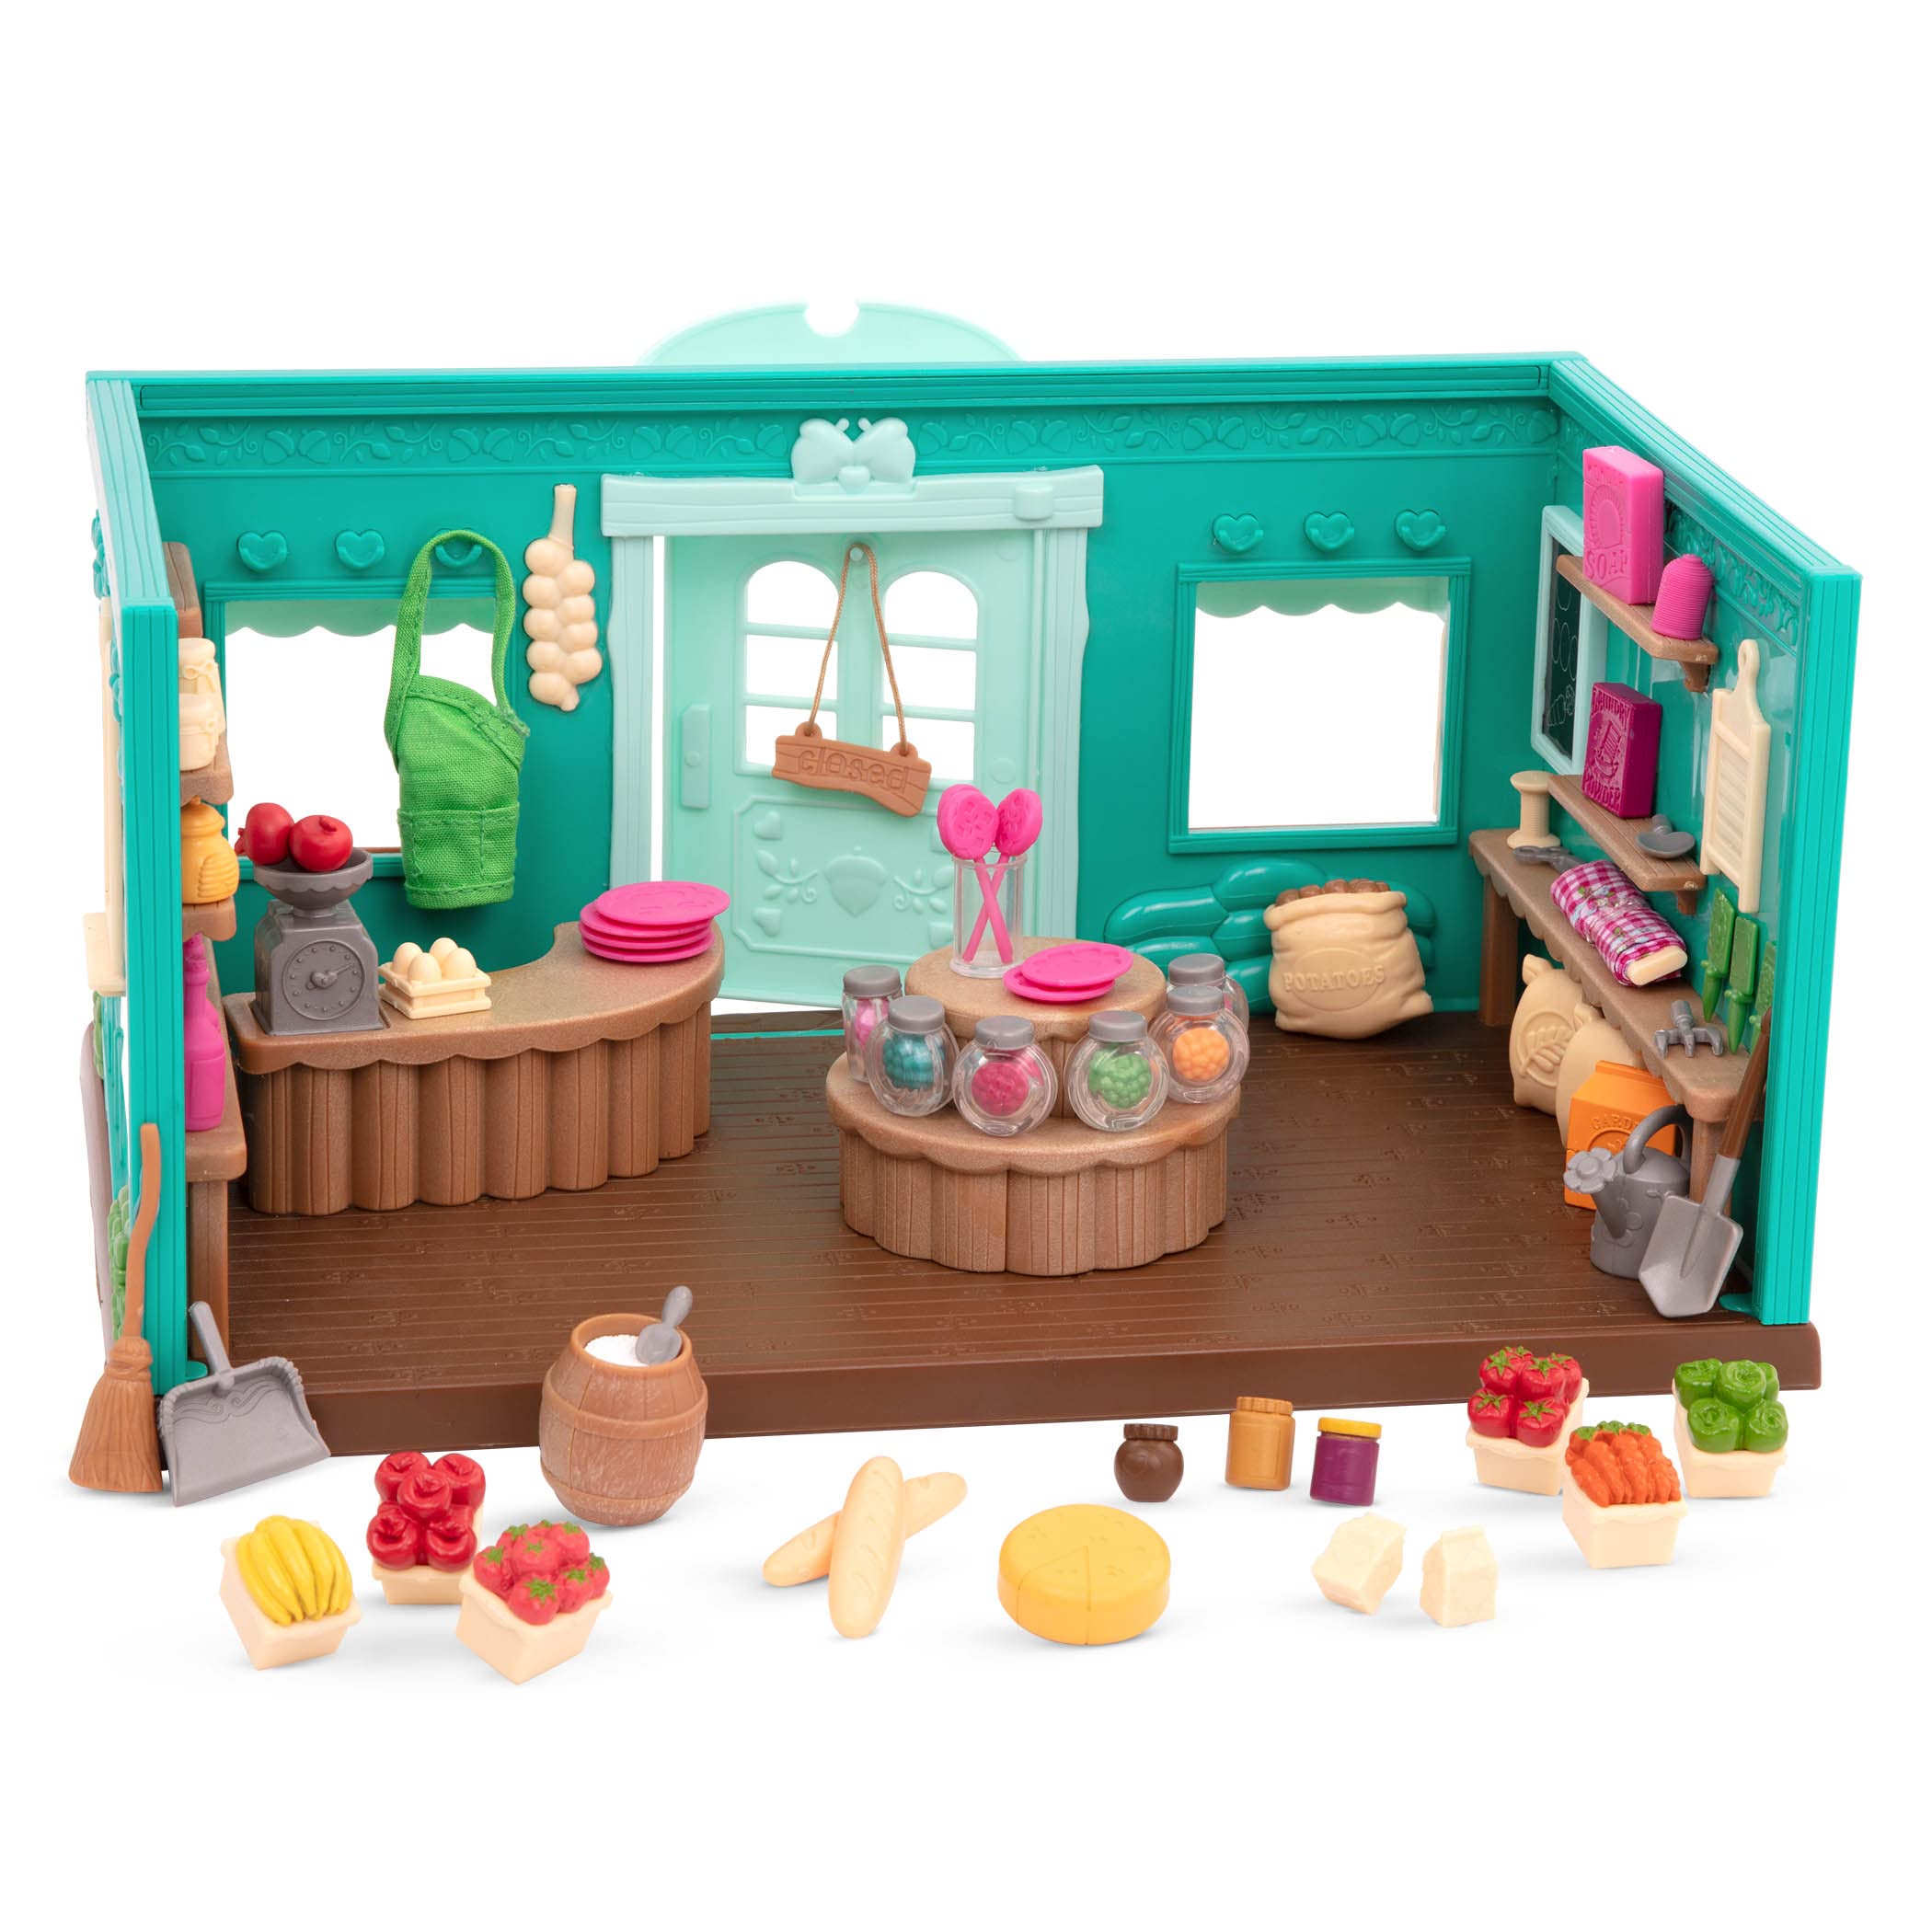 Lil Woodzeez - Toy Figures Playset – General Store Playhouse – Stackable – Mini Furniture & Play Food – Storybook & posable figures Included – 3 Years +